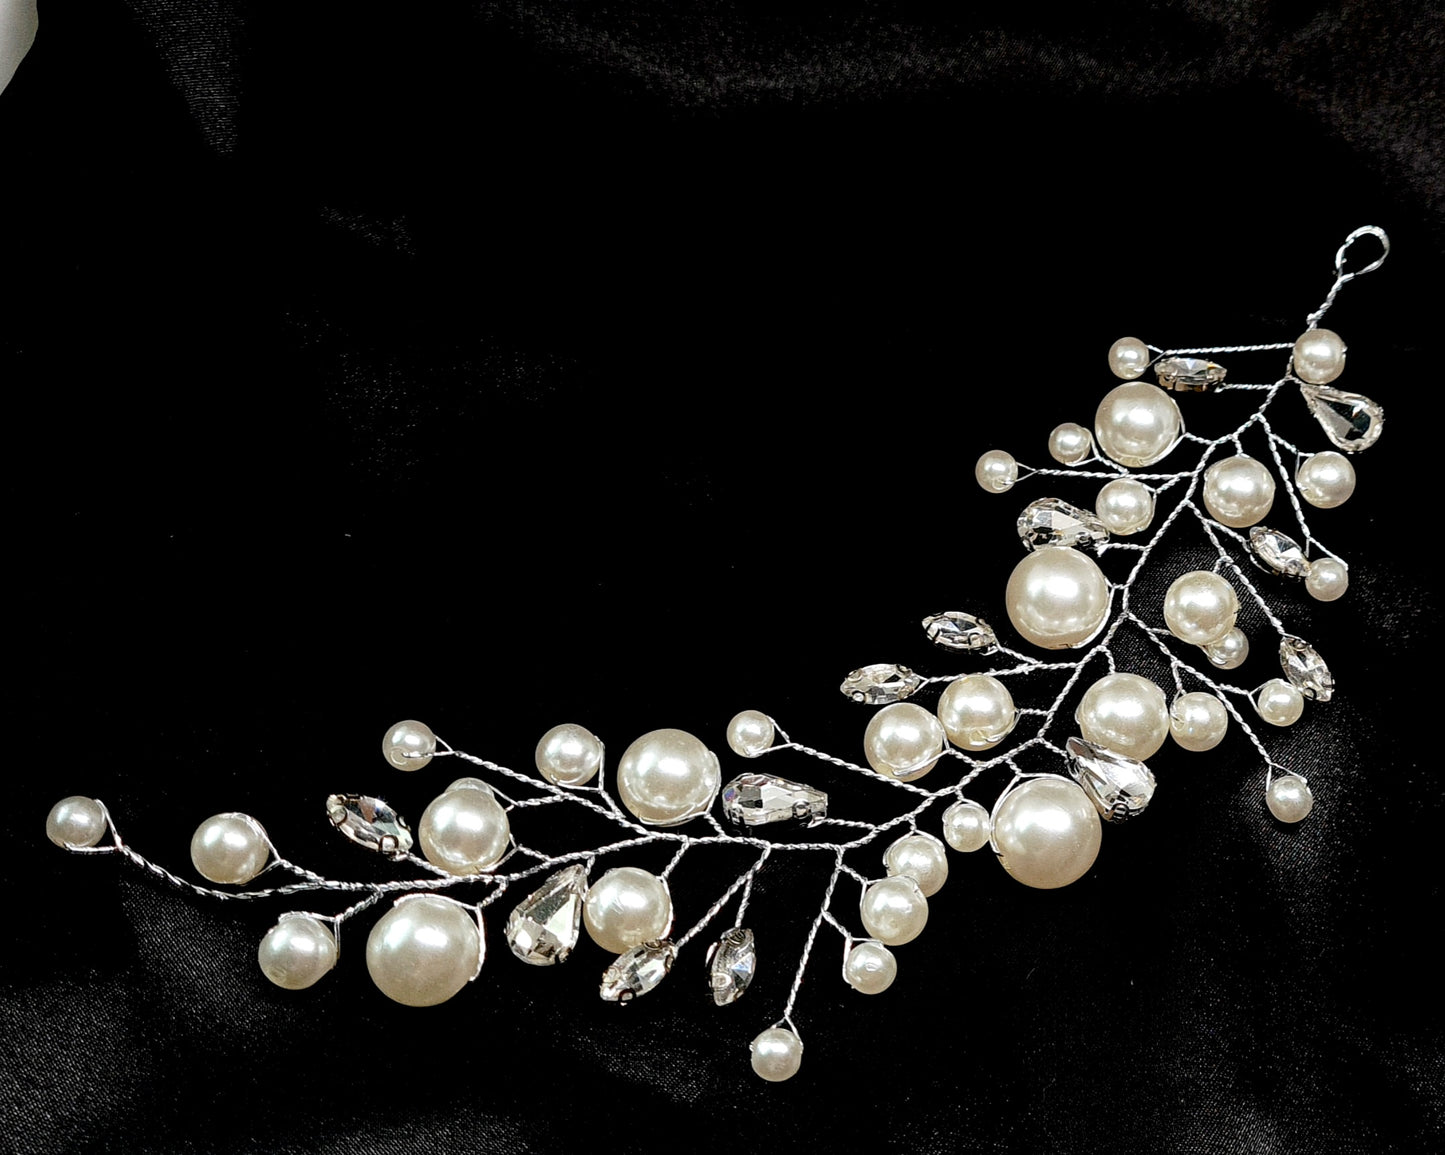 a pearl bridal hair comb on a black background. The hair comb is made of pearls and crystals, and it has a delicate, feminine design. It is perfect for a bride who wants to add a touch of elegance to her wedding day look.